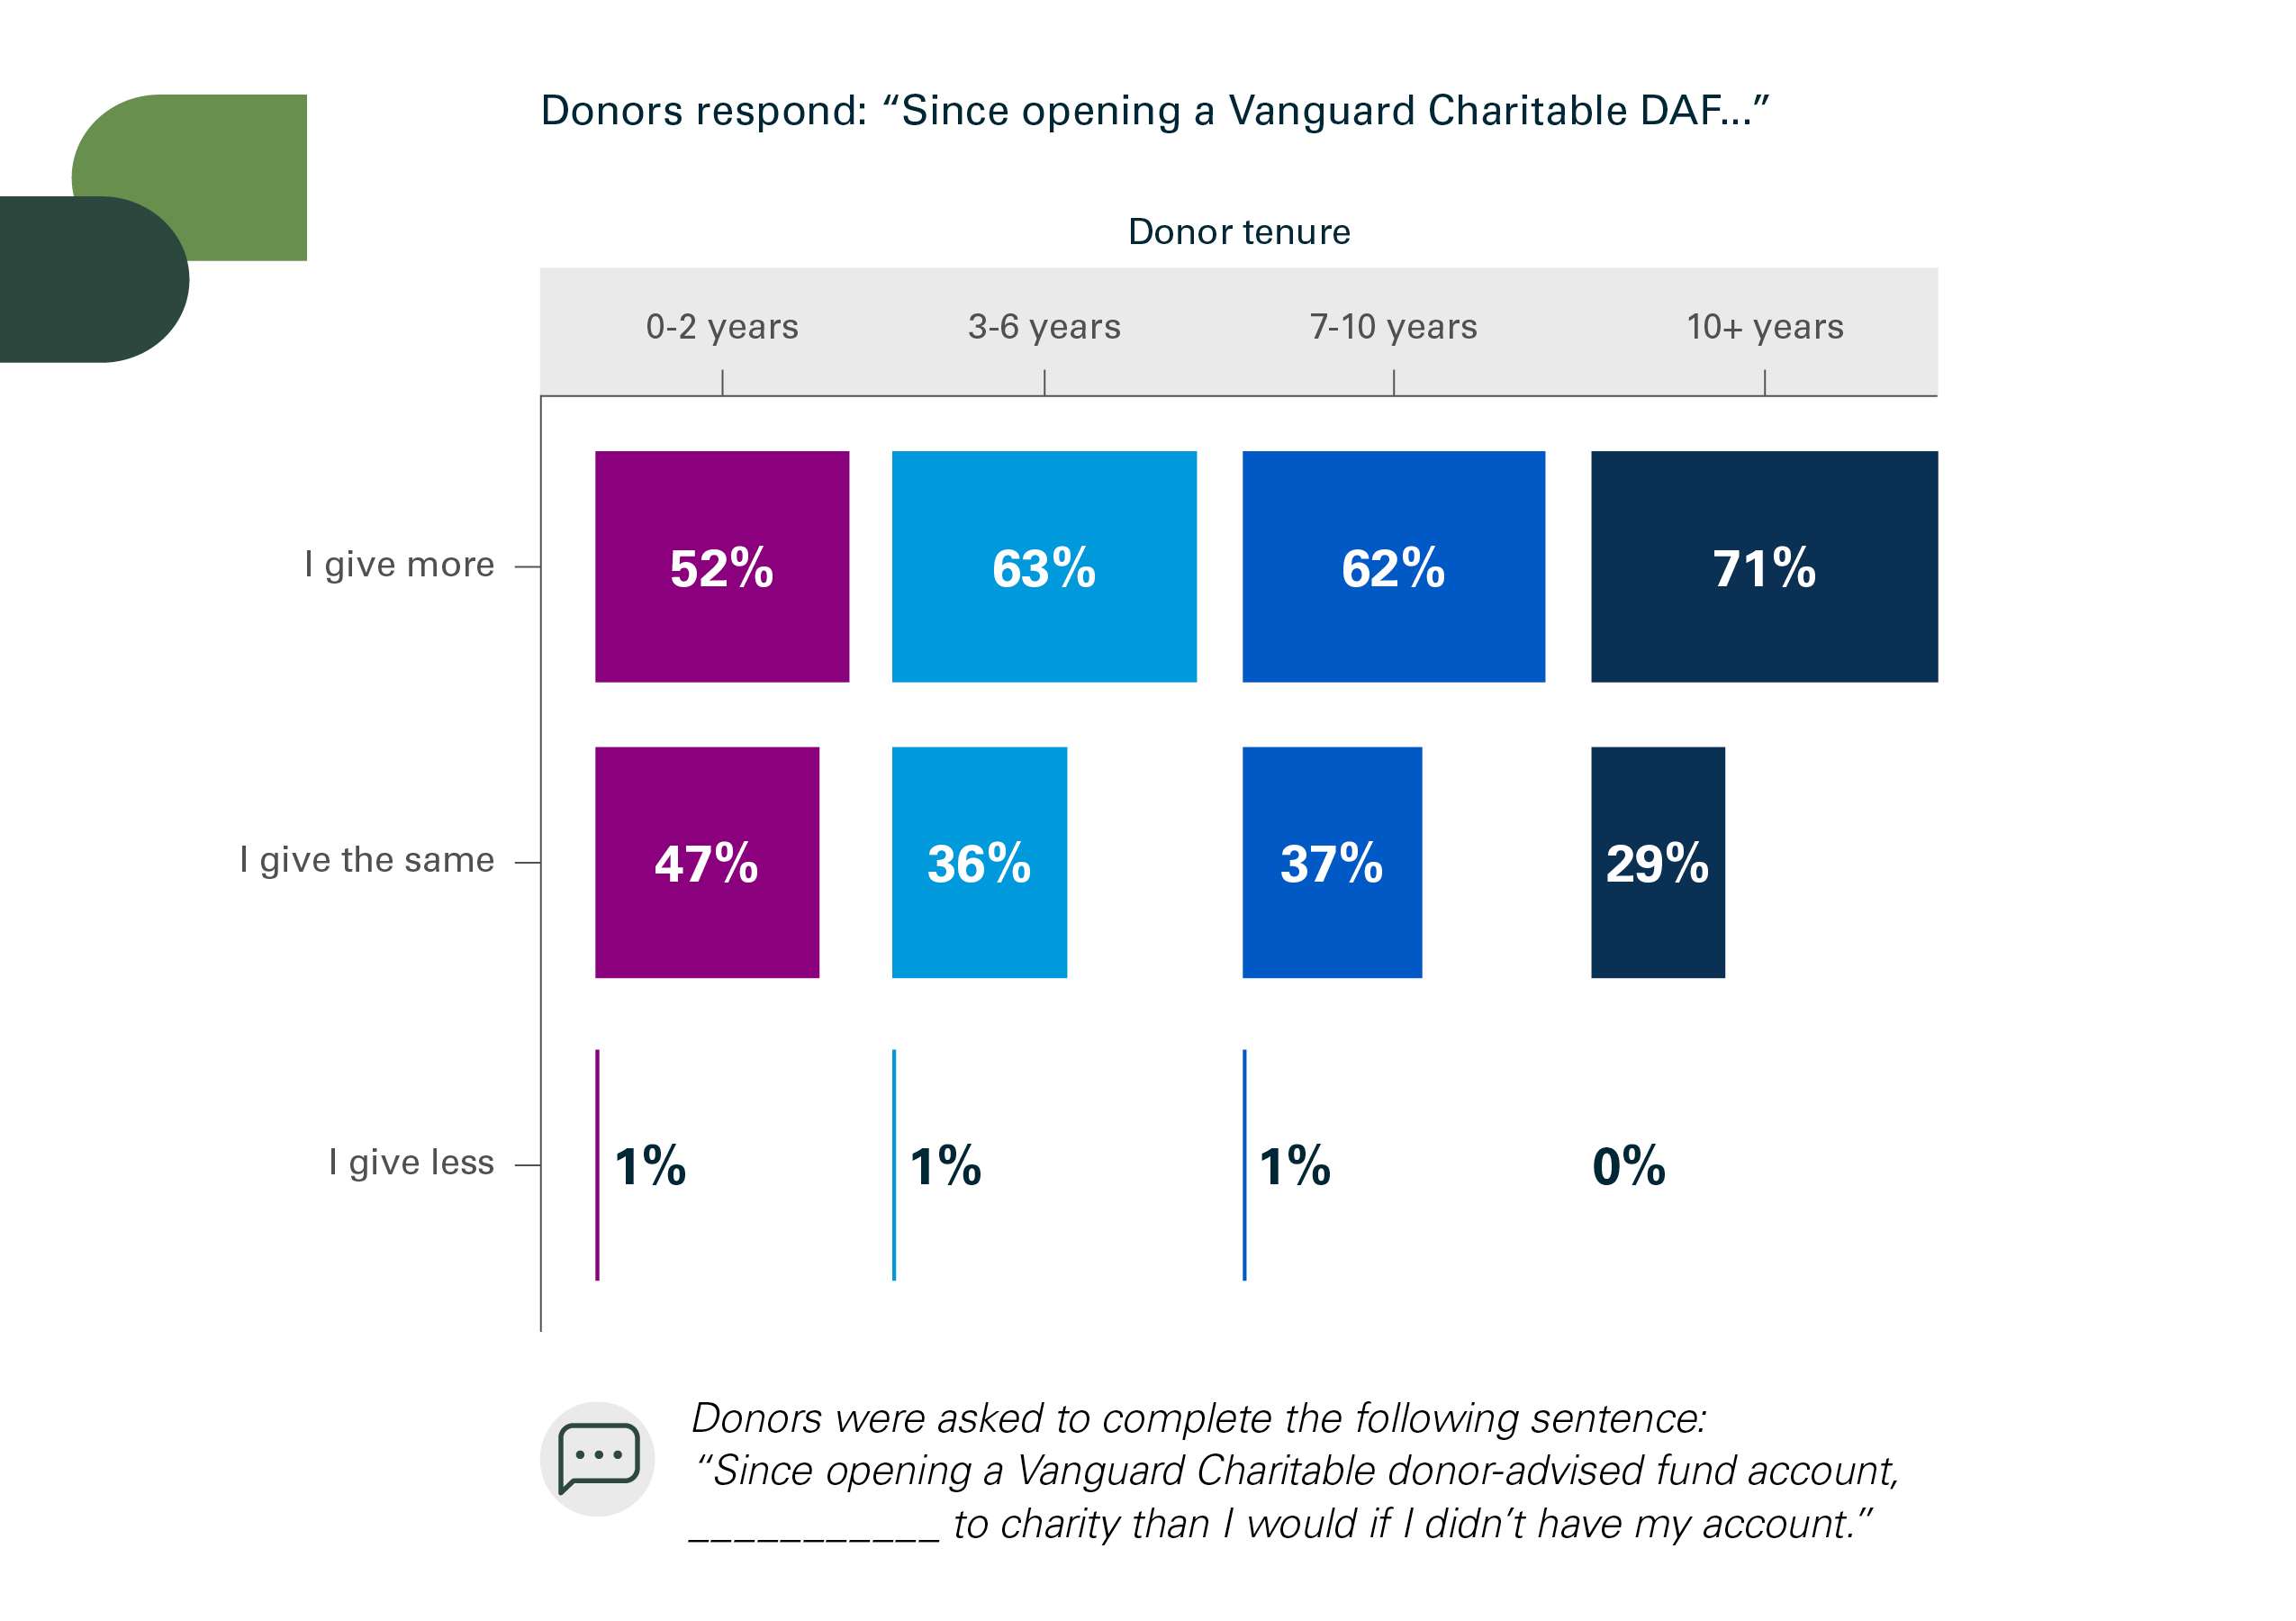 Data shows that the majority of Vanguard Charitable donors report giving more to charity.